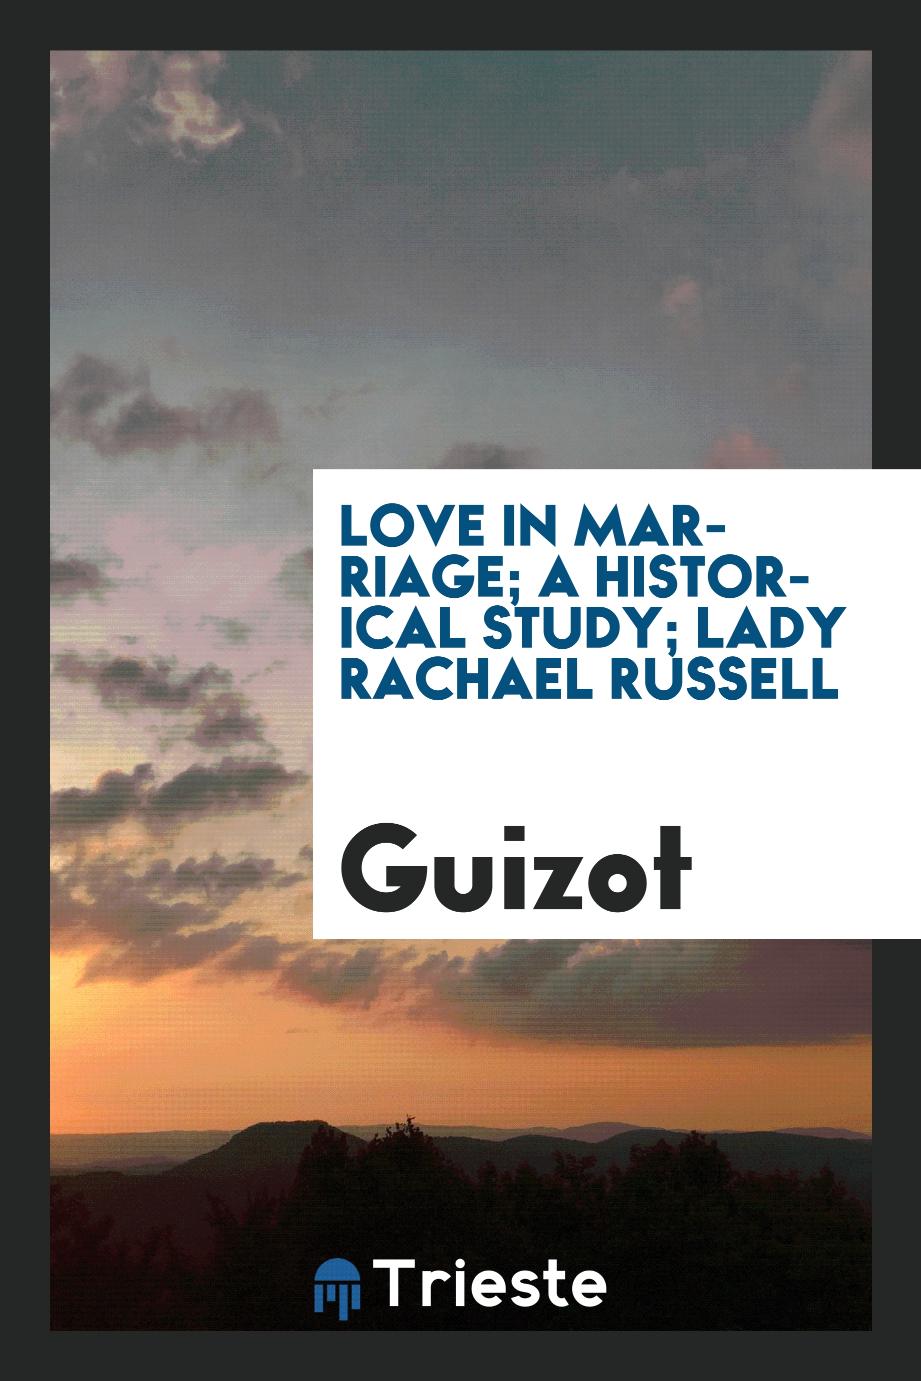 Love in Marriage; a historical study; Lady Rachael Russell